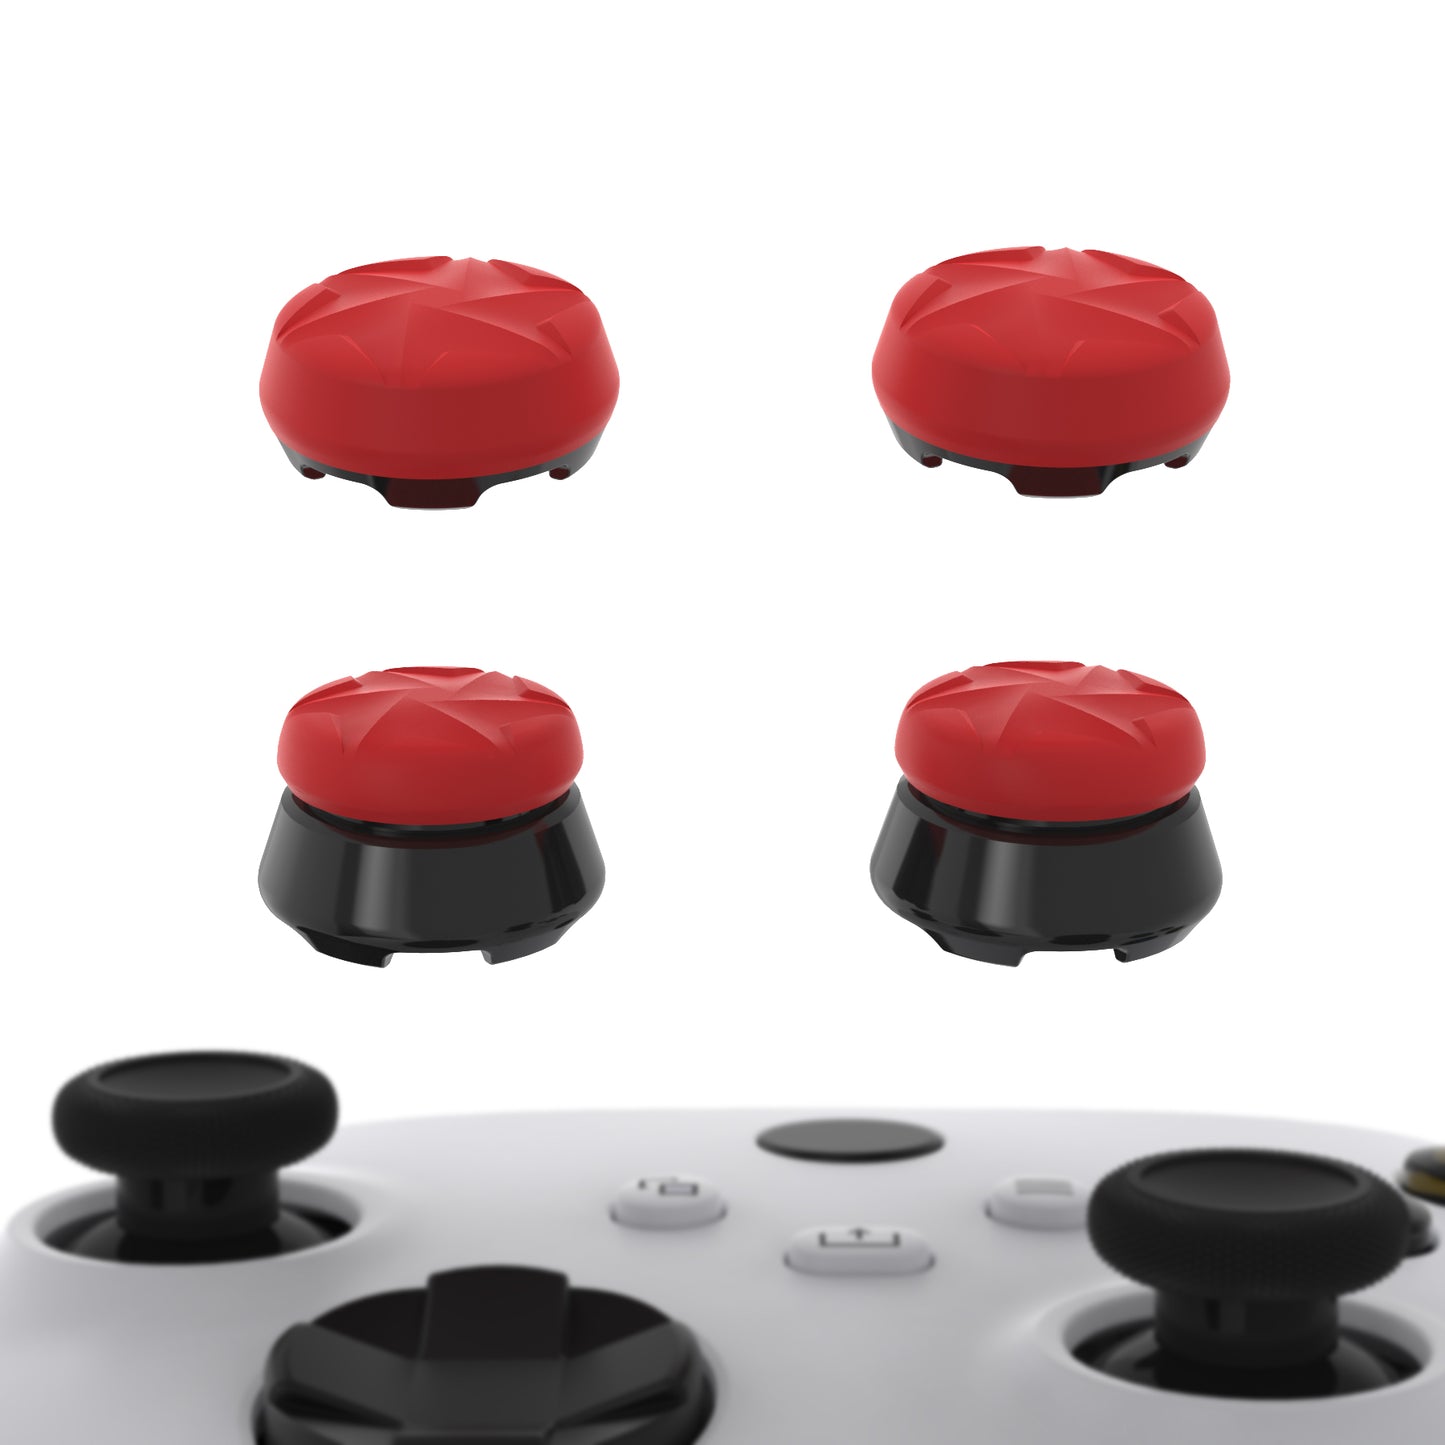 PlayVital Thumbs Pro HURRICANE Thumbstick Extender for Xbox Core Controller, for Xbox Series X/S Controller, Joystick Caps for Xbox One Controller - 2 High Raise & 2 Mid Raise Concave - Scarlet Red & Black - PJM5006 PlayVital